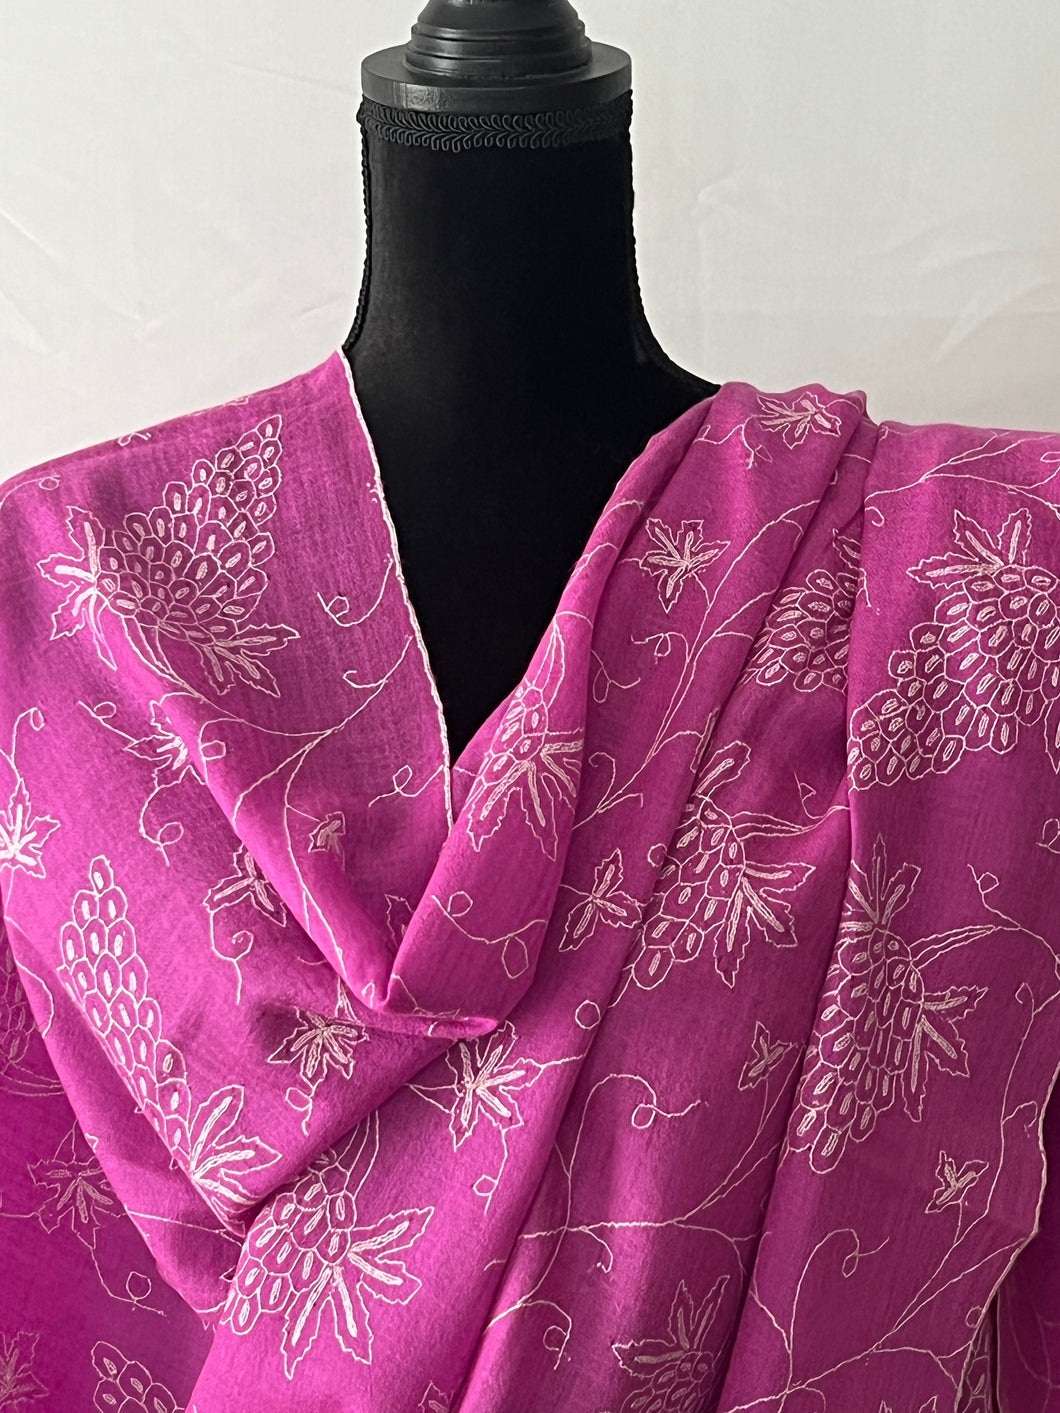 Jali Embroidered Pure Pashmina (100% Cashmere) - Extra Large Hand Woven and embroidered Kashmiri Shawl, all over embroidery, pink shawl